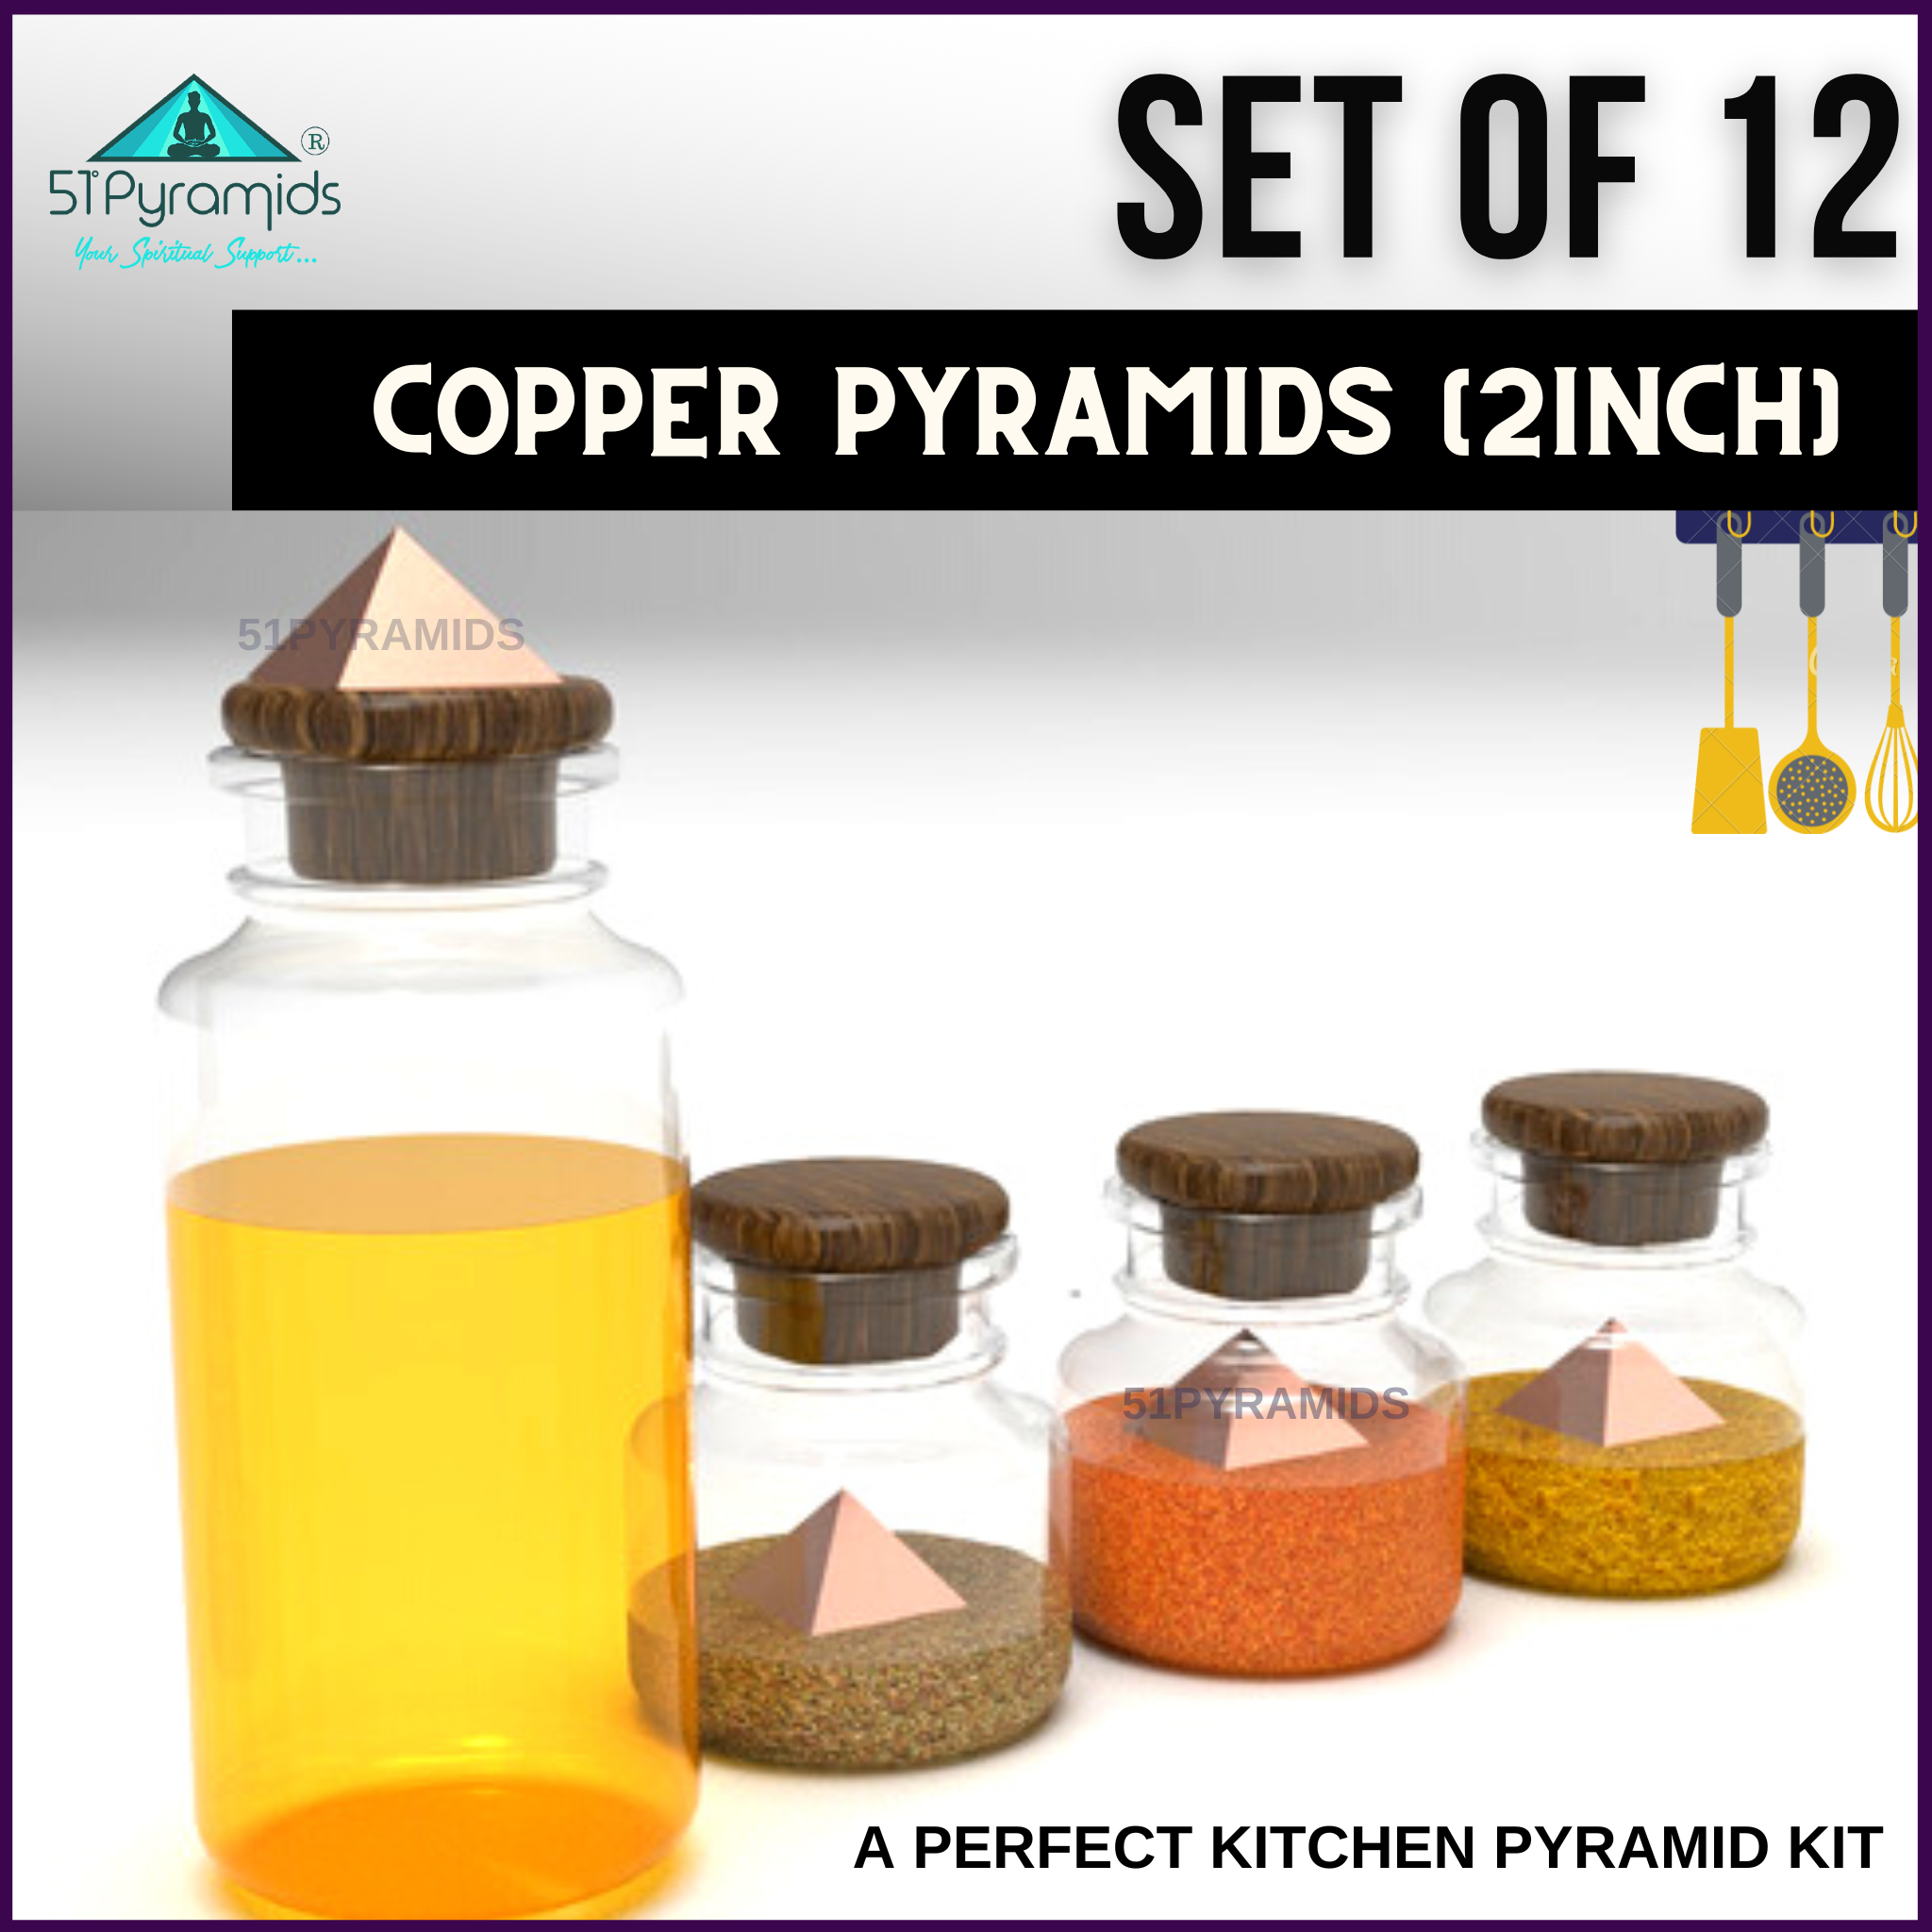 Set of 12 - Pyramid Kitchen Kit - 2inch Pure Copper Pyramid(Small)